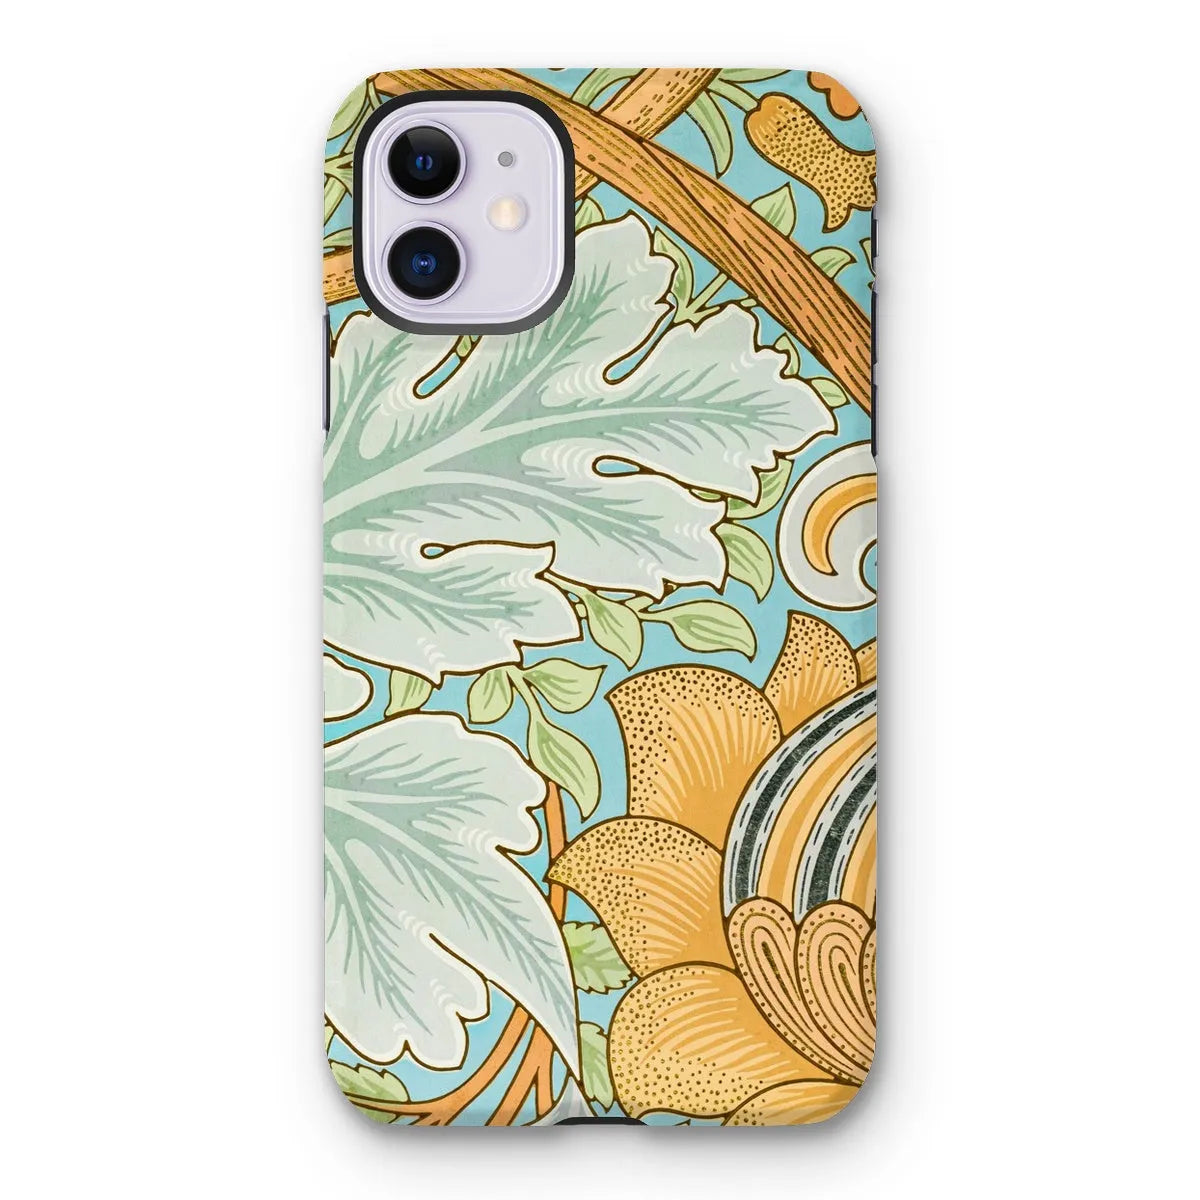 St. James - Arts And Crafts Phone Case - William Morris - Iphone 11 / Matte - Mobile Phone Cases - Aesthetic Art